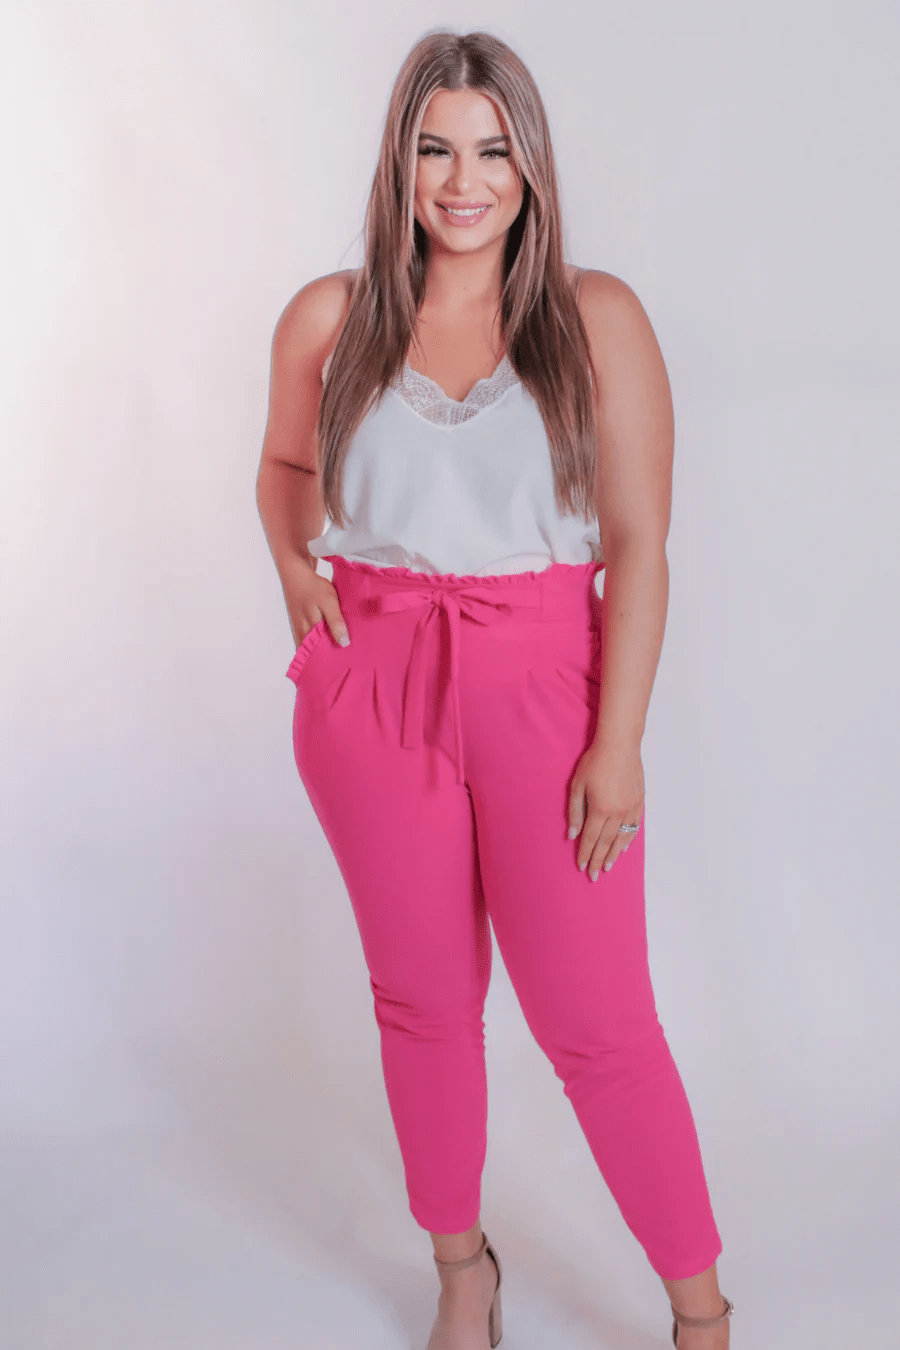 Envy Stylz Boutique Women - Apparel - Shirts - T-Shirts Pink Slice of Style Paper Bag Pants